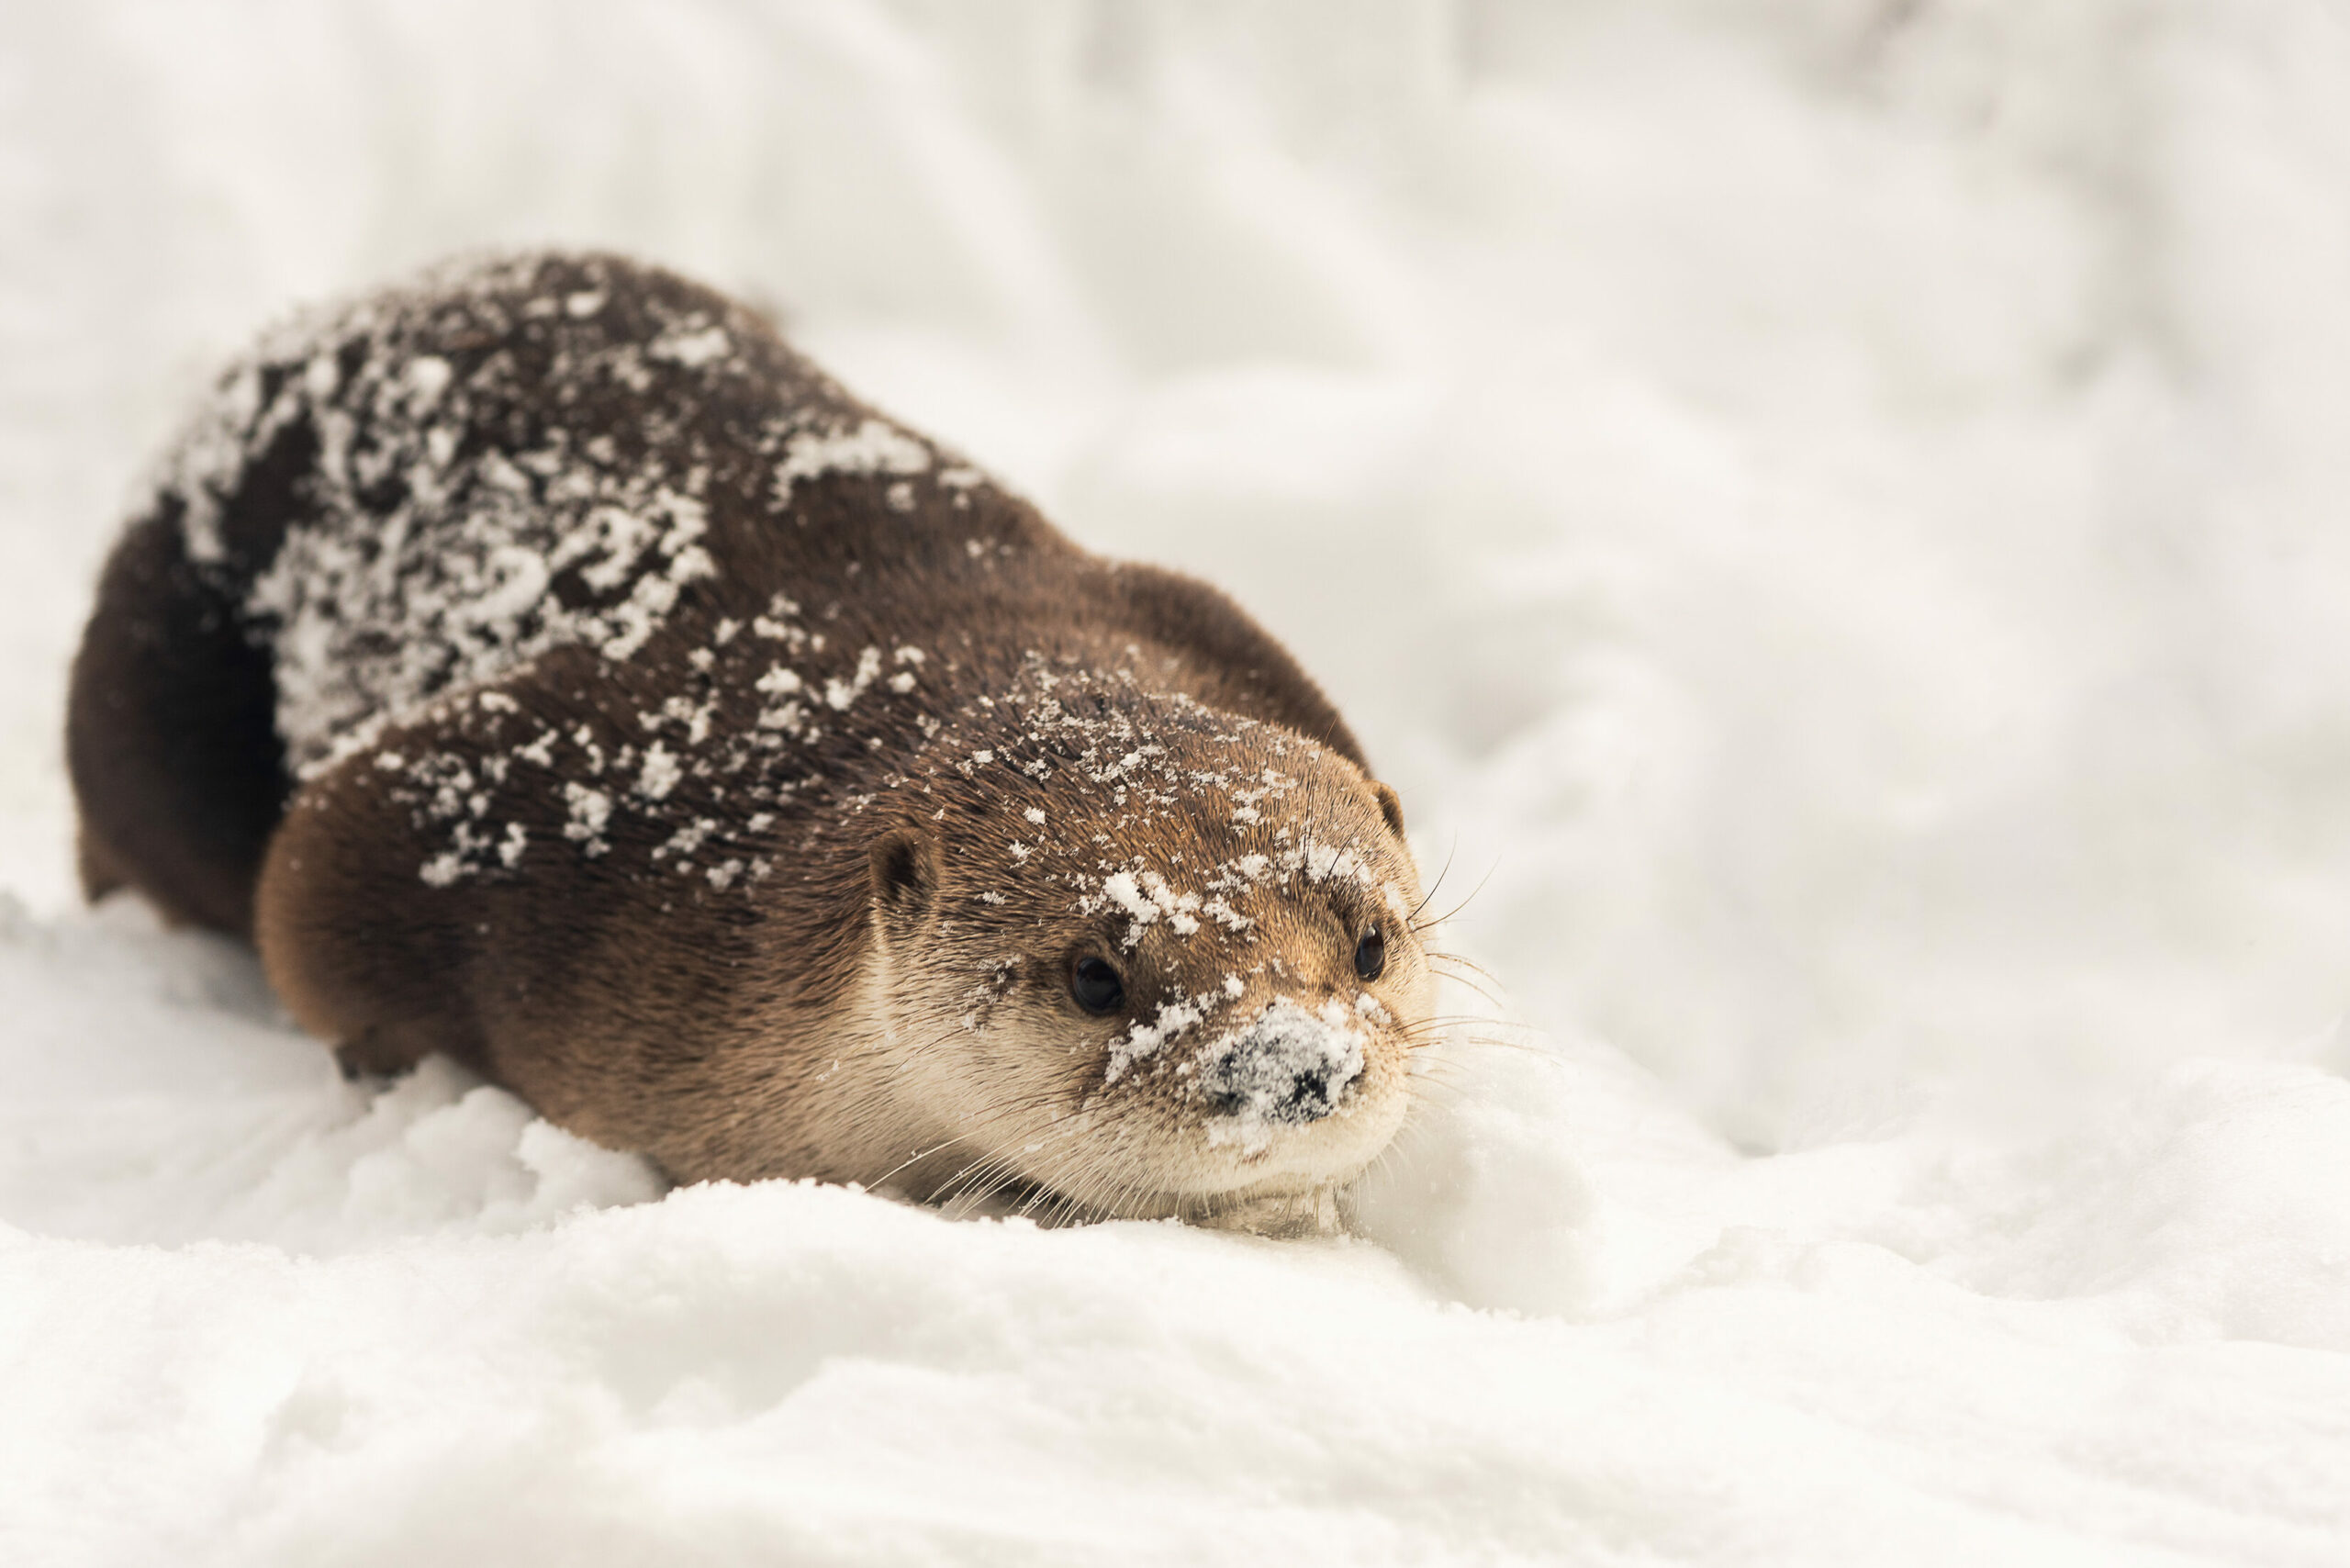 An otter plays in the snow